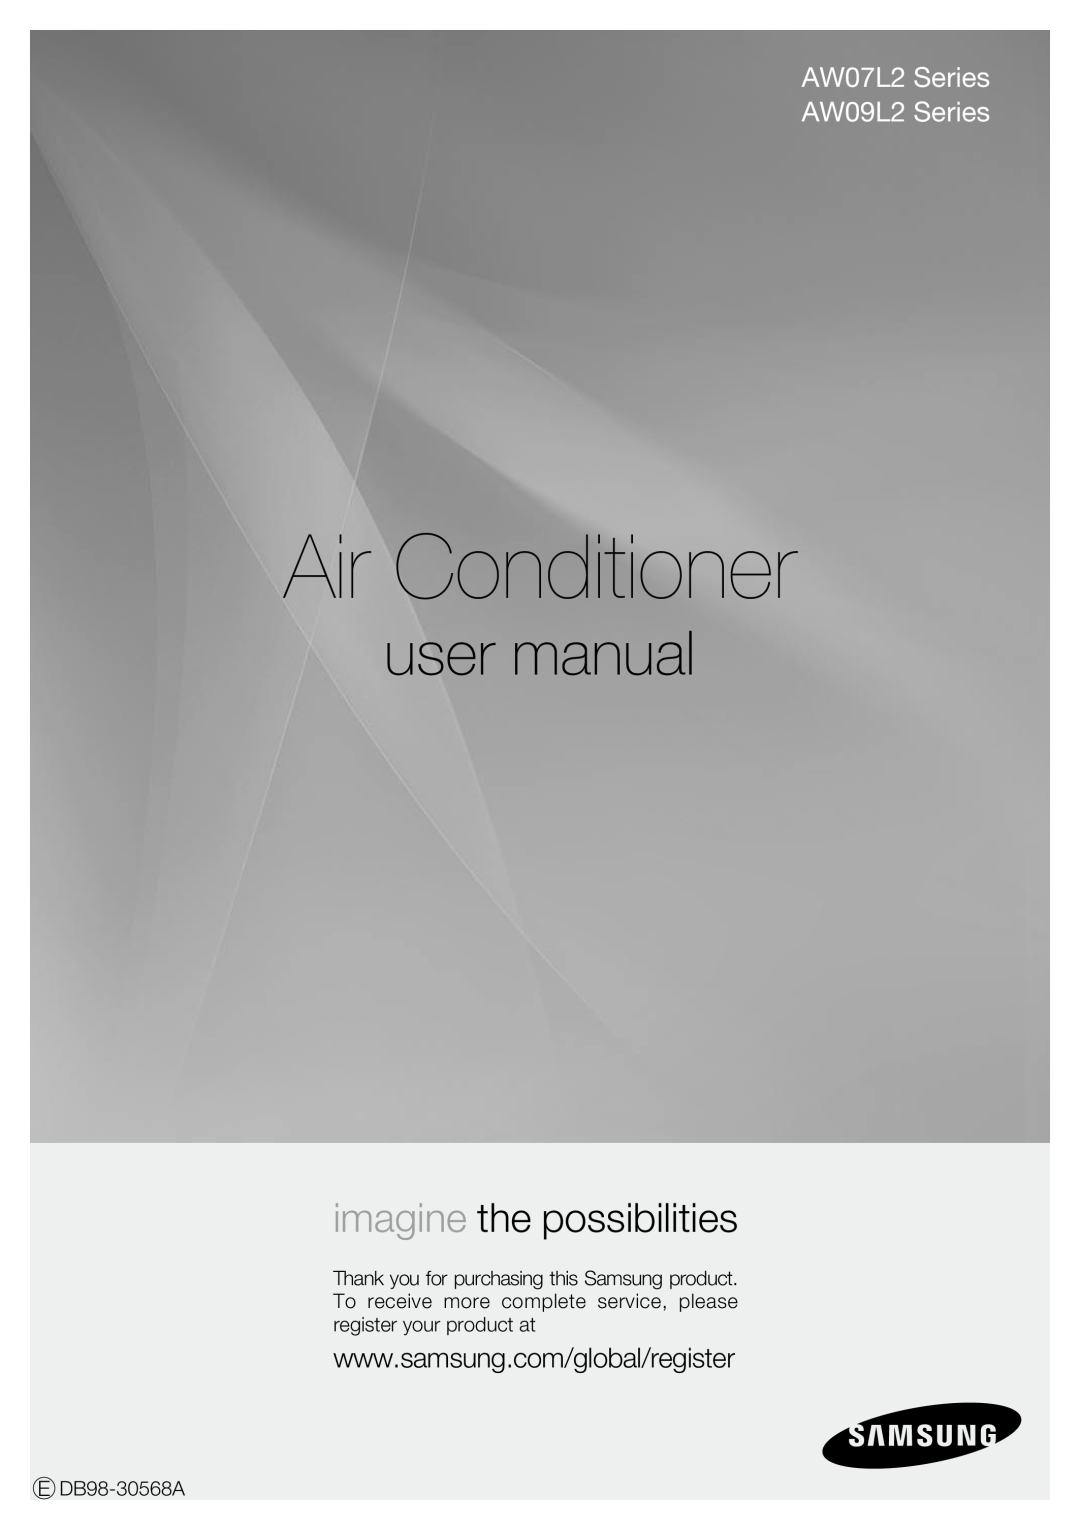 Samsung user manual Air Conditioner, imagine the possibilities, AW07L2 Series AW09L2 Series 